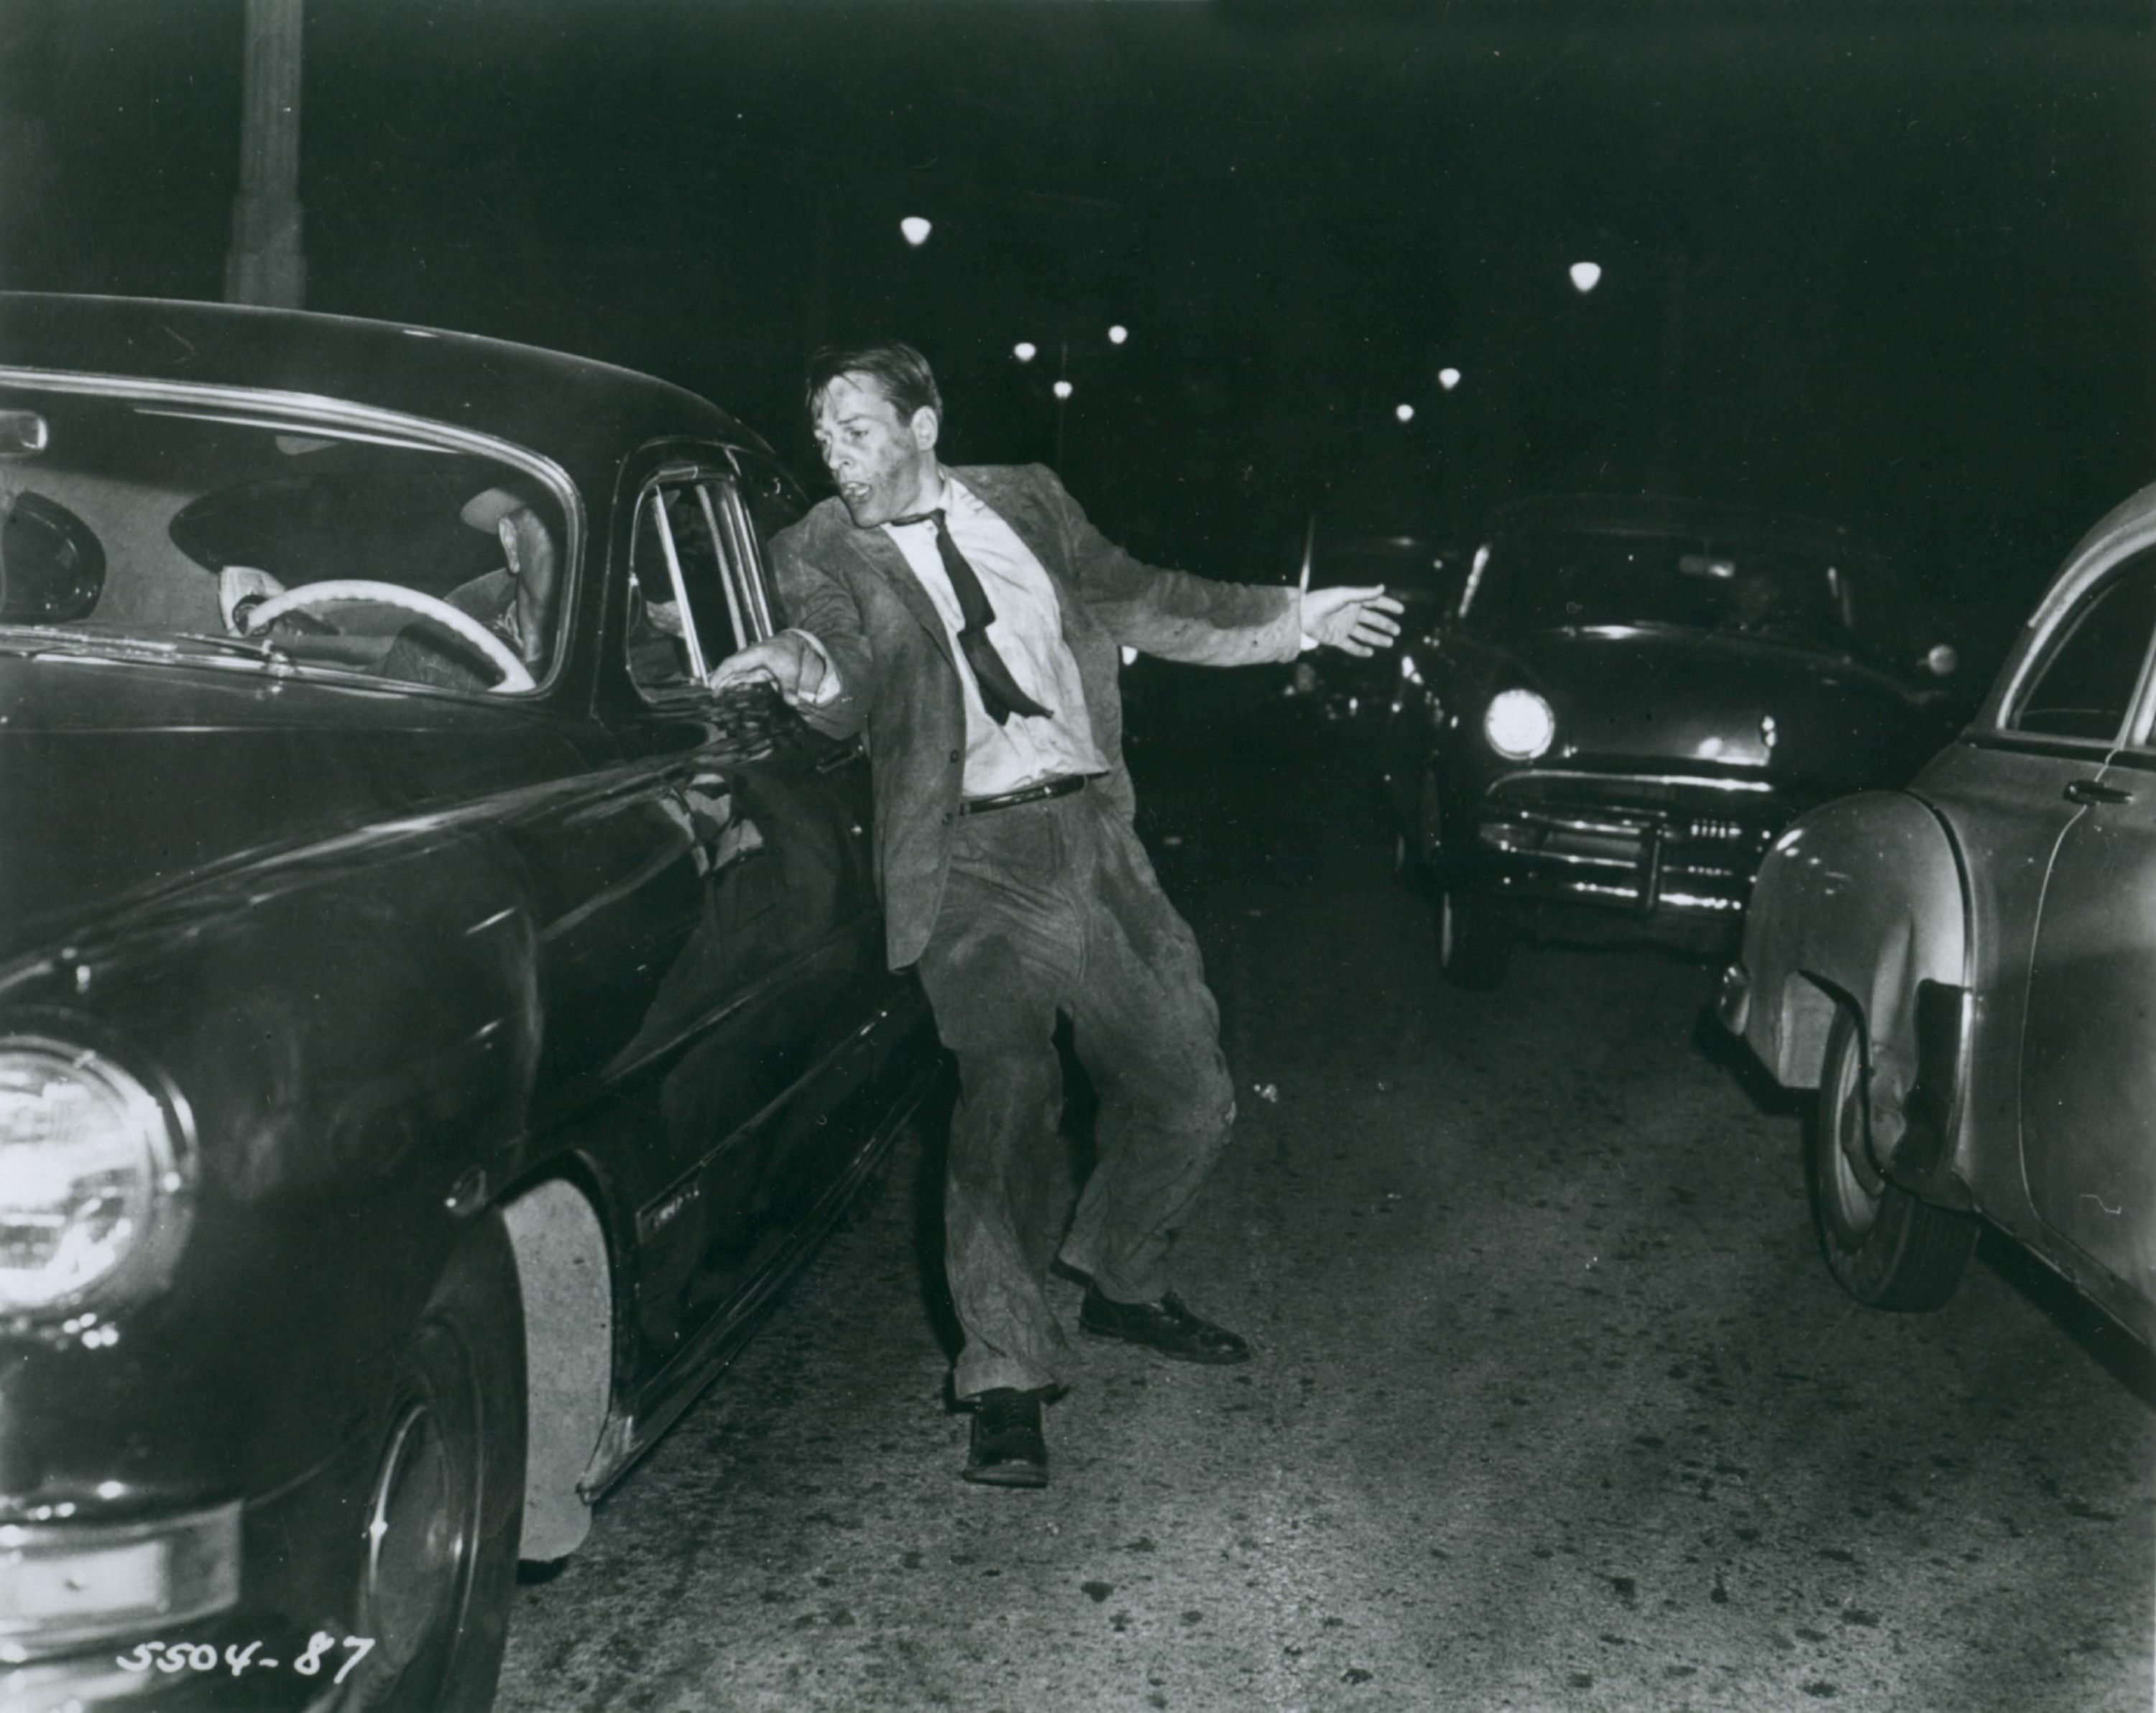 A haggard man in a suit bounces between cars in traffic